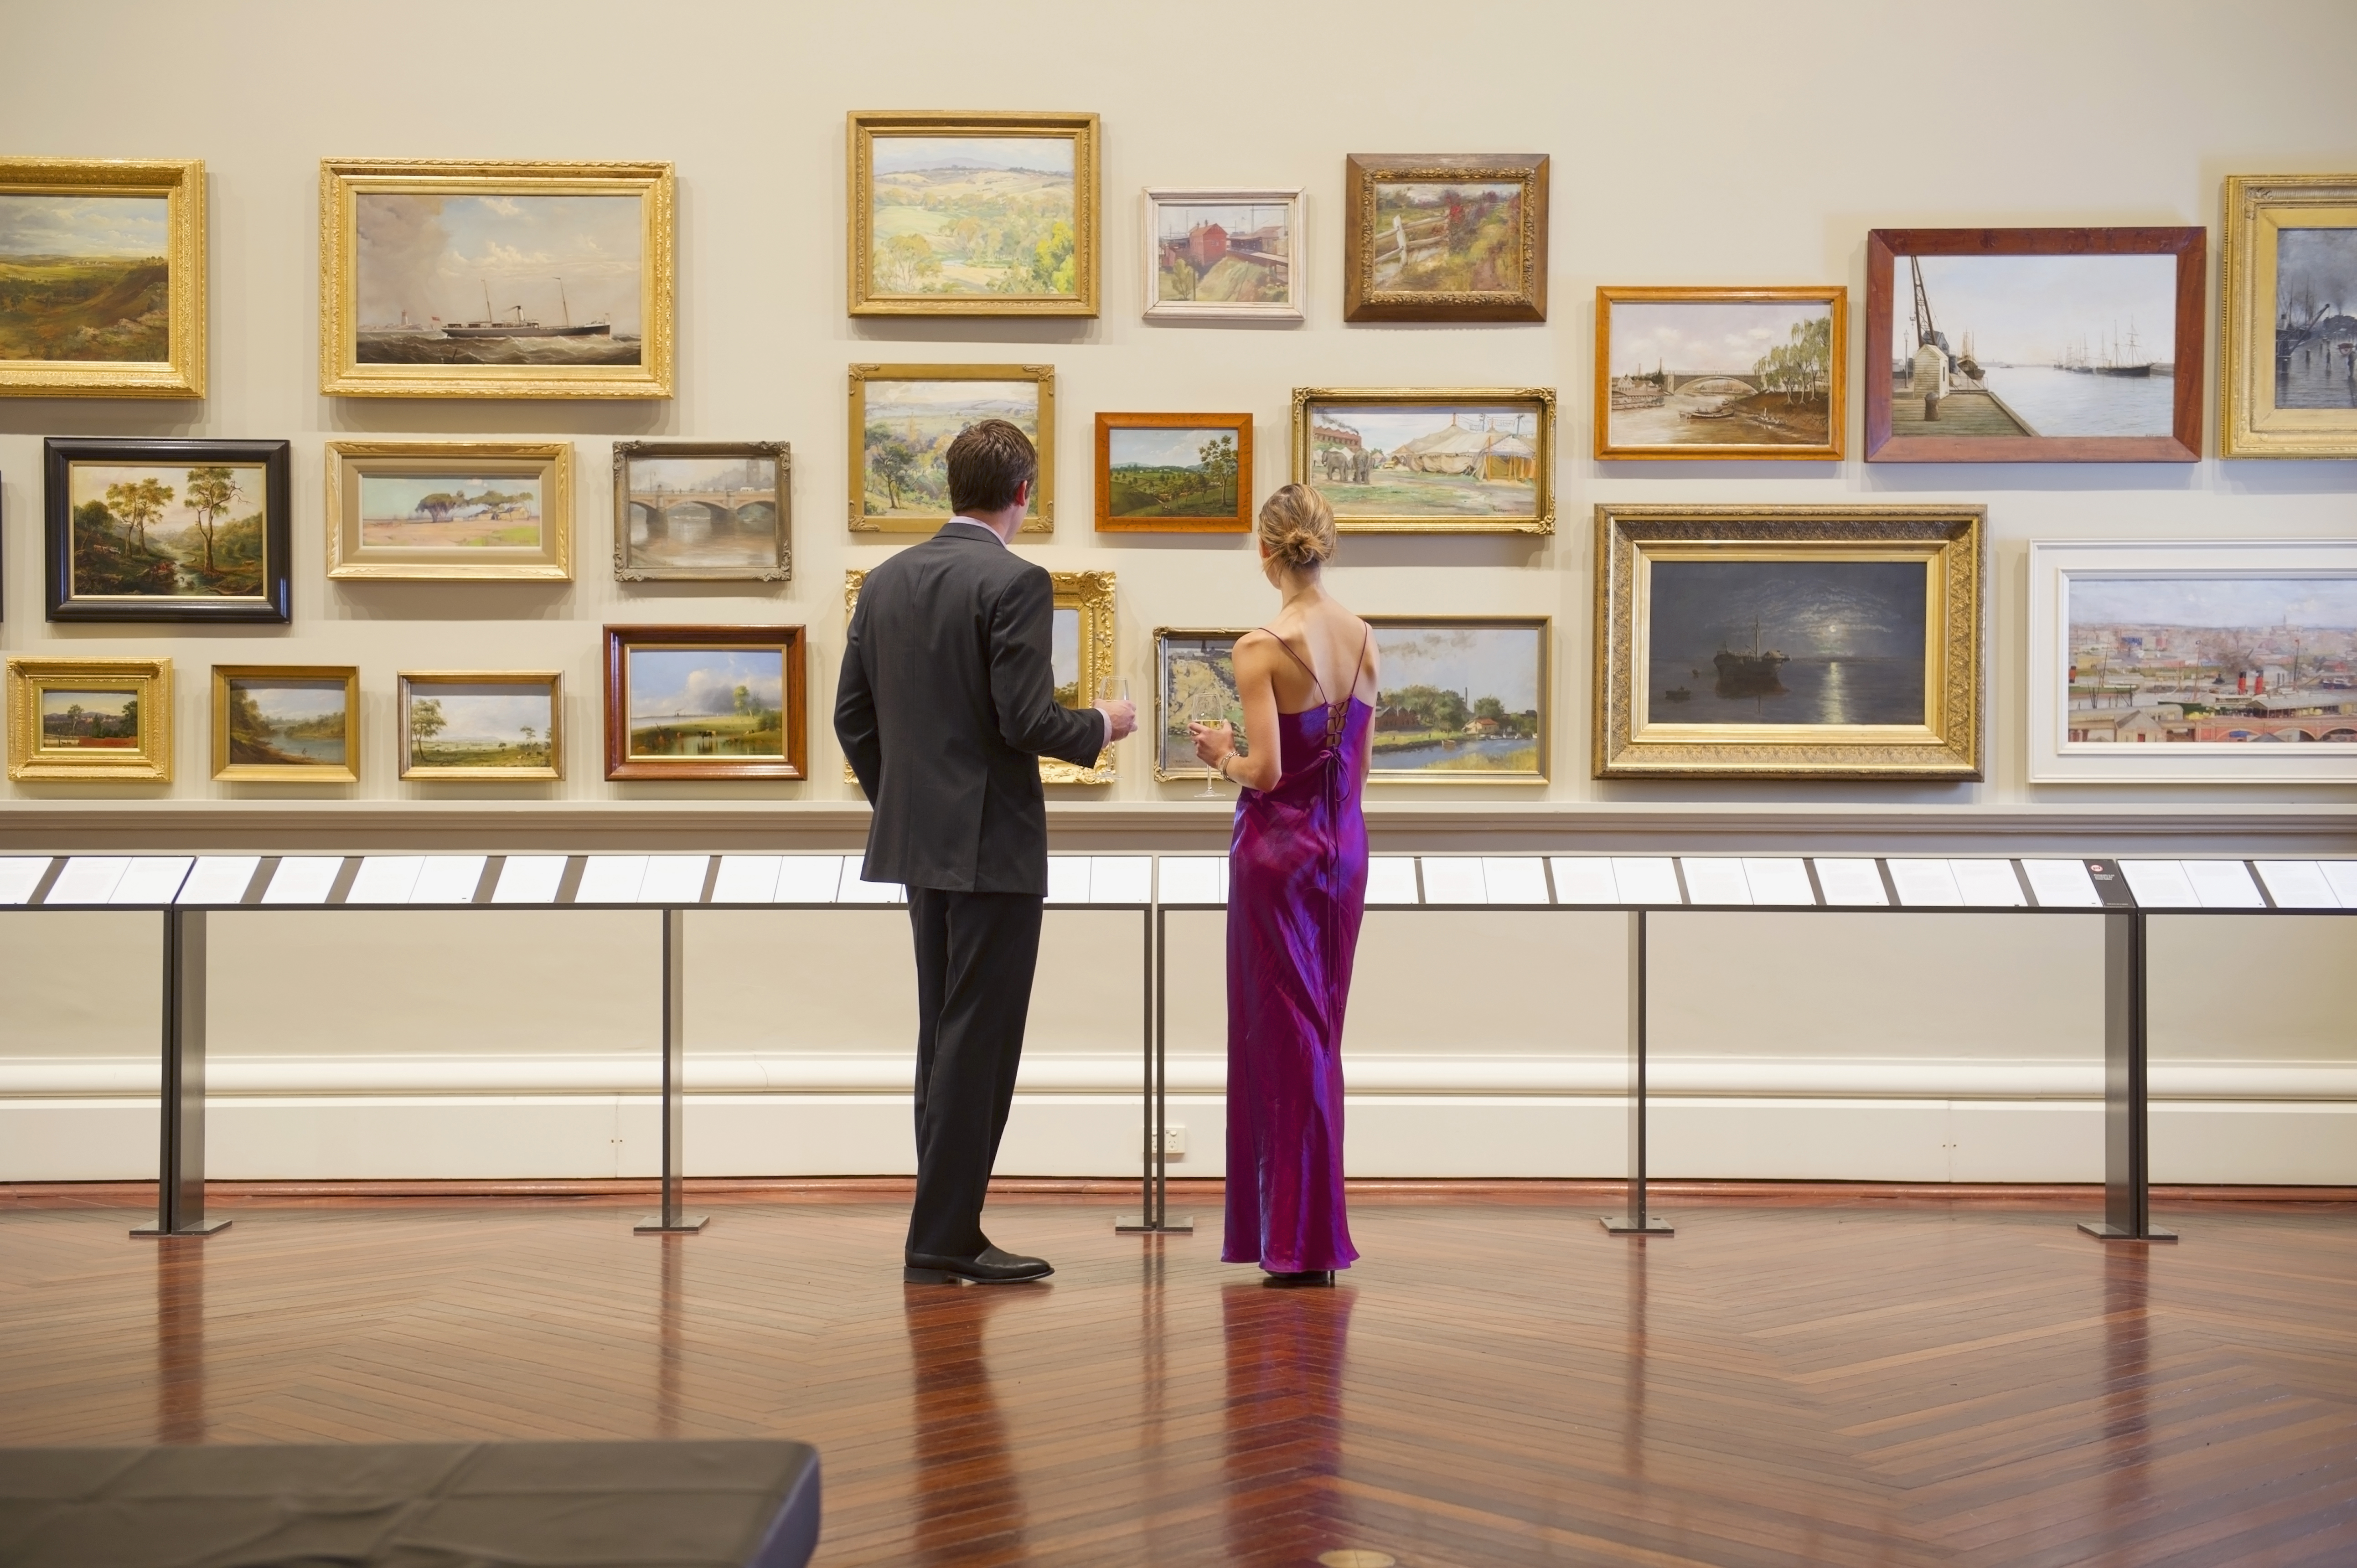 Couple in a museum. | Source: Getty Images